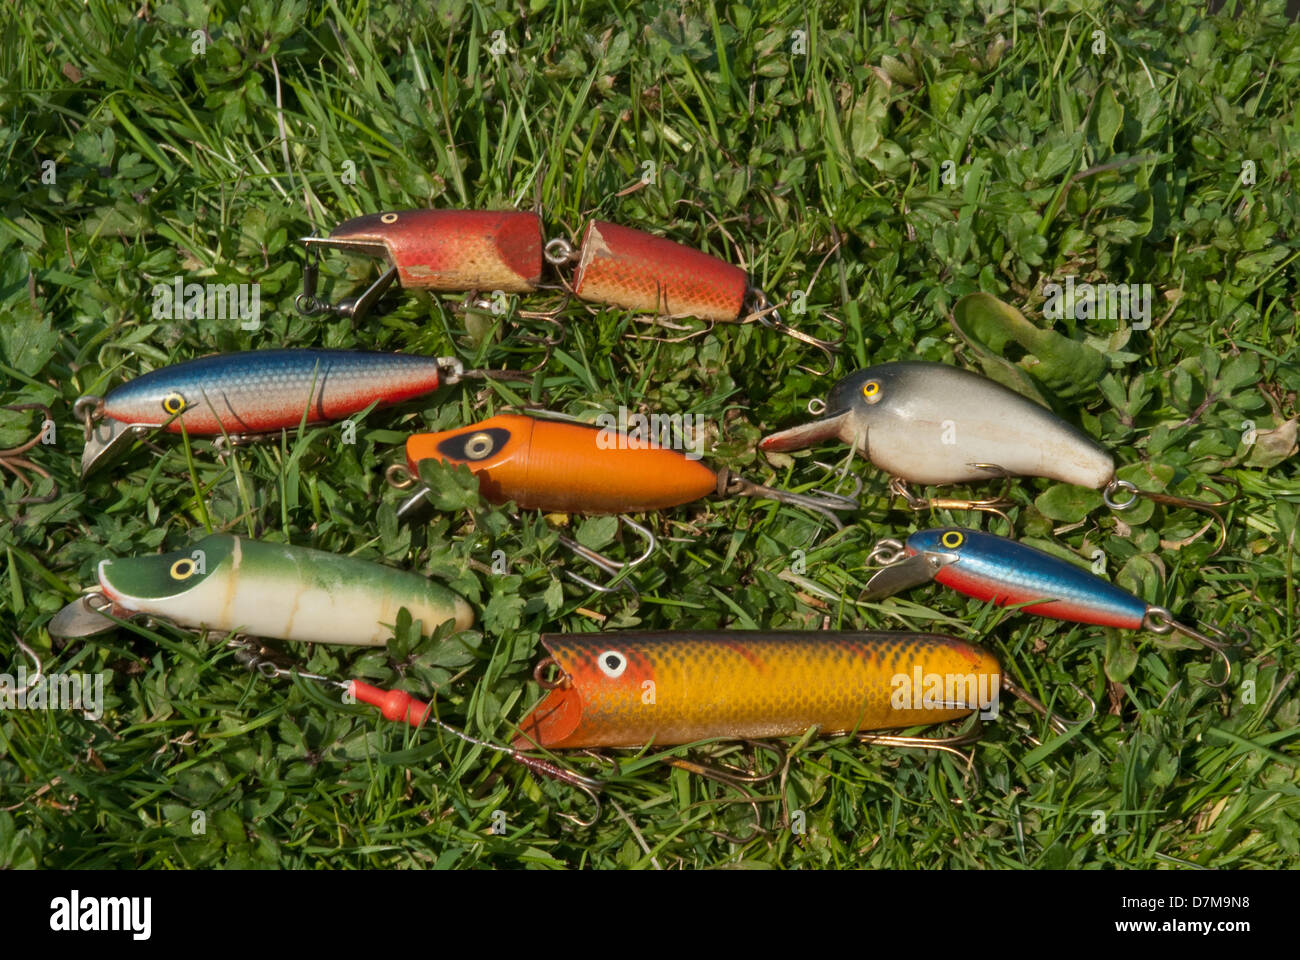 https://c8.alamy.com/comp/D7M9N8/a-selection-of-vintage-pike-freshwater-fishing-lures-D7M9N8.jpg